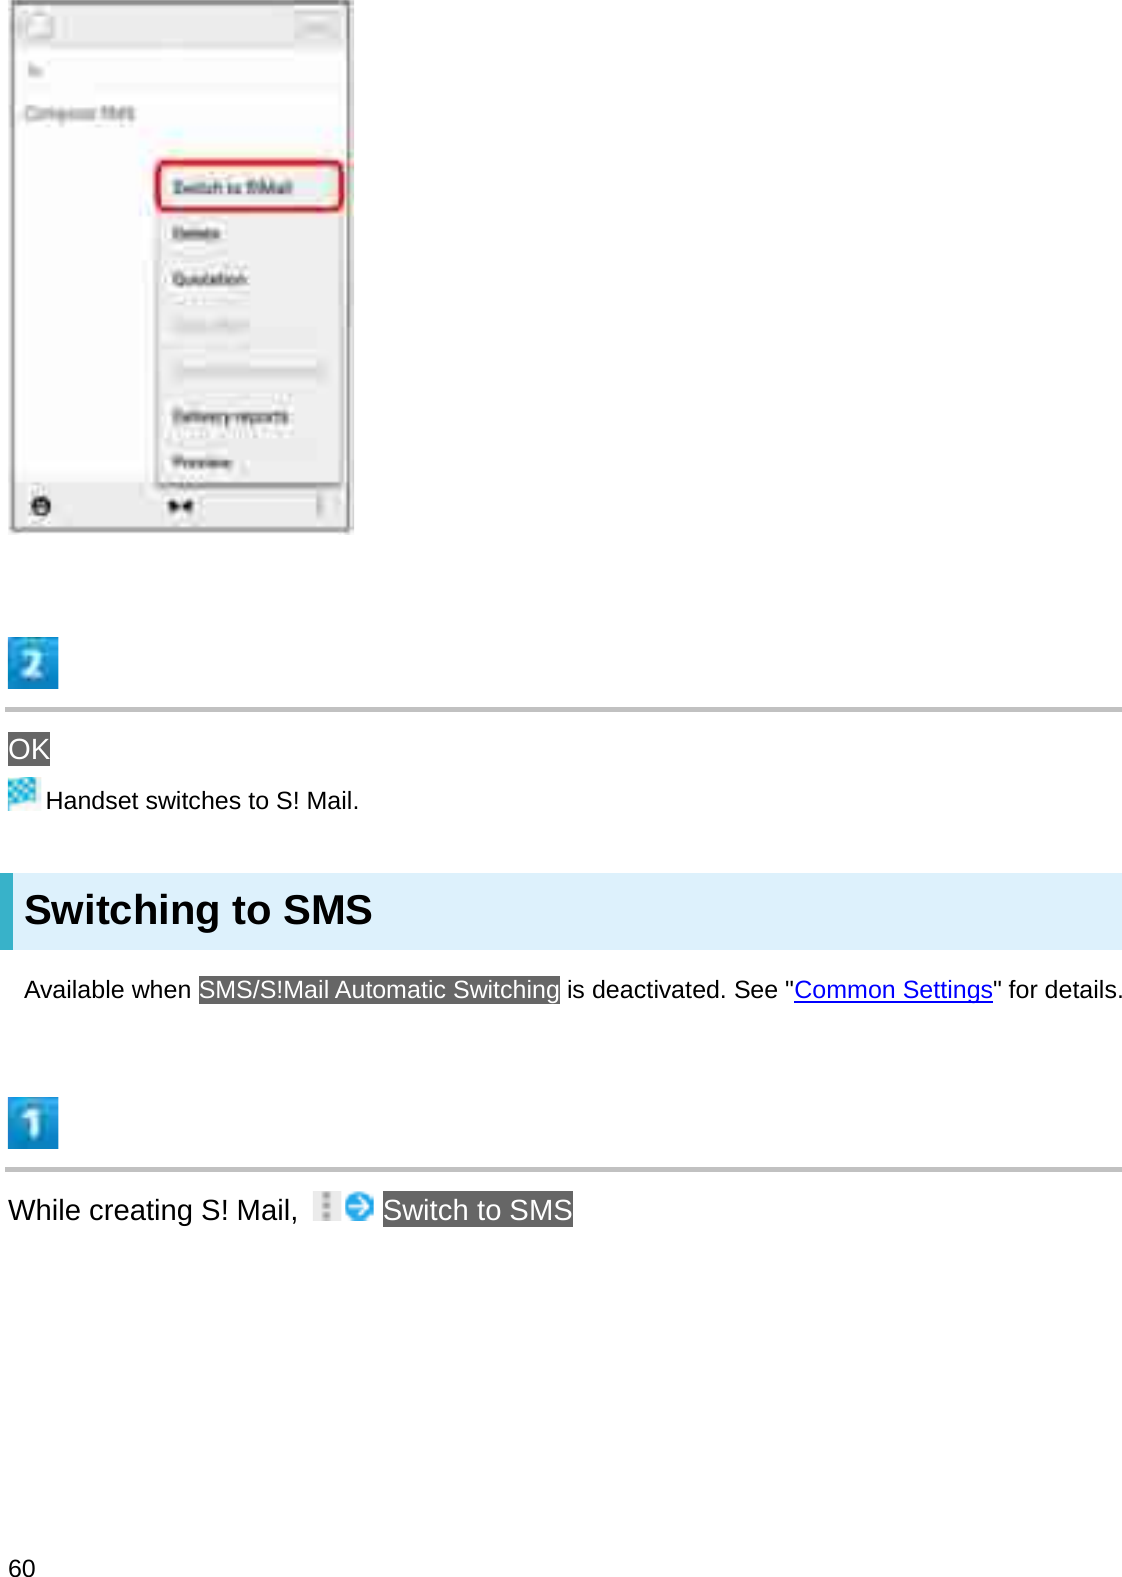 OKHandset switches to S! Mail.Switching to SMSAvailable when SMS/S!Mail Automatic Switching is deactivated. See &quot;Common Settings&quot; for details.While creating S! Mail,  Switch to SMS60